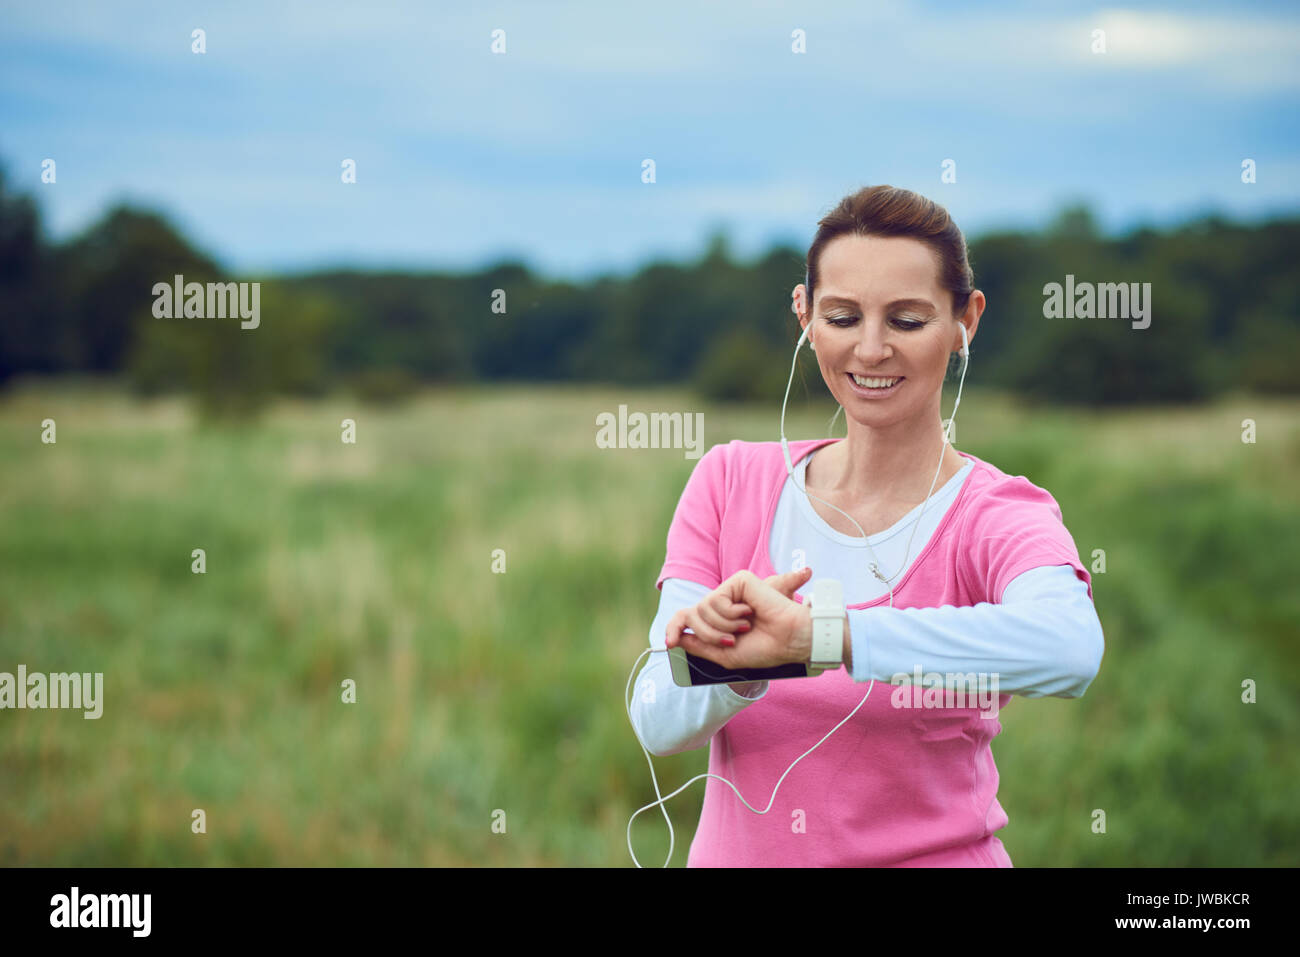 Middle-aged woman checking her sport or health watch while out jogging in the countryside listening to music on her mobile phone in a healthy lifestyl Stock Photo